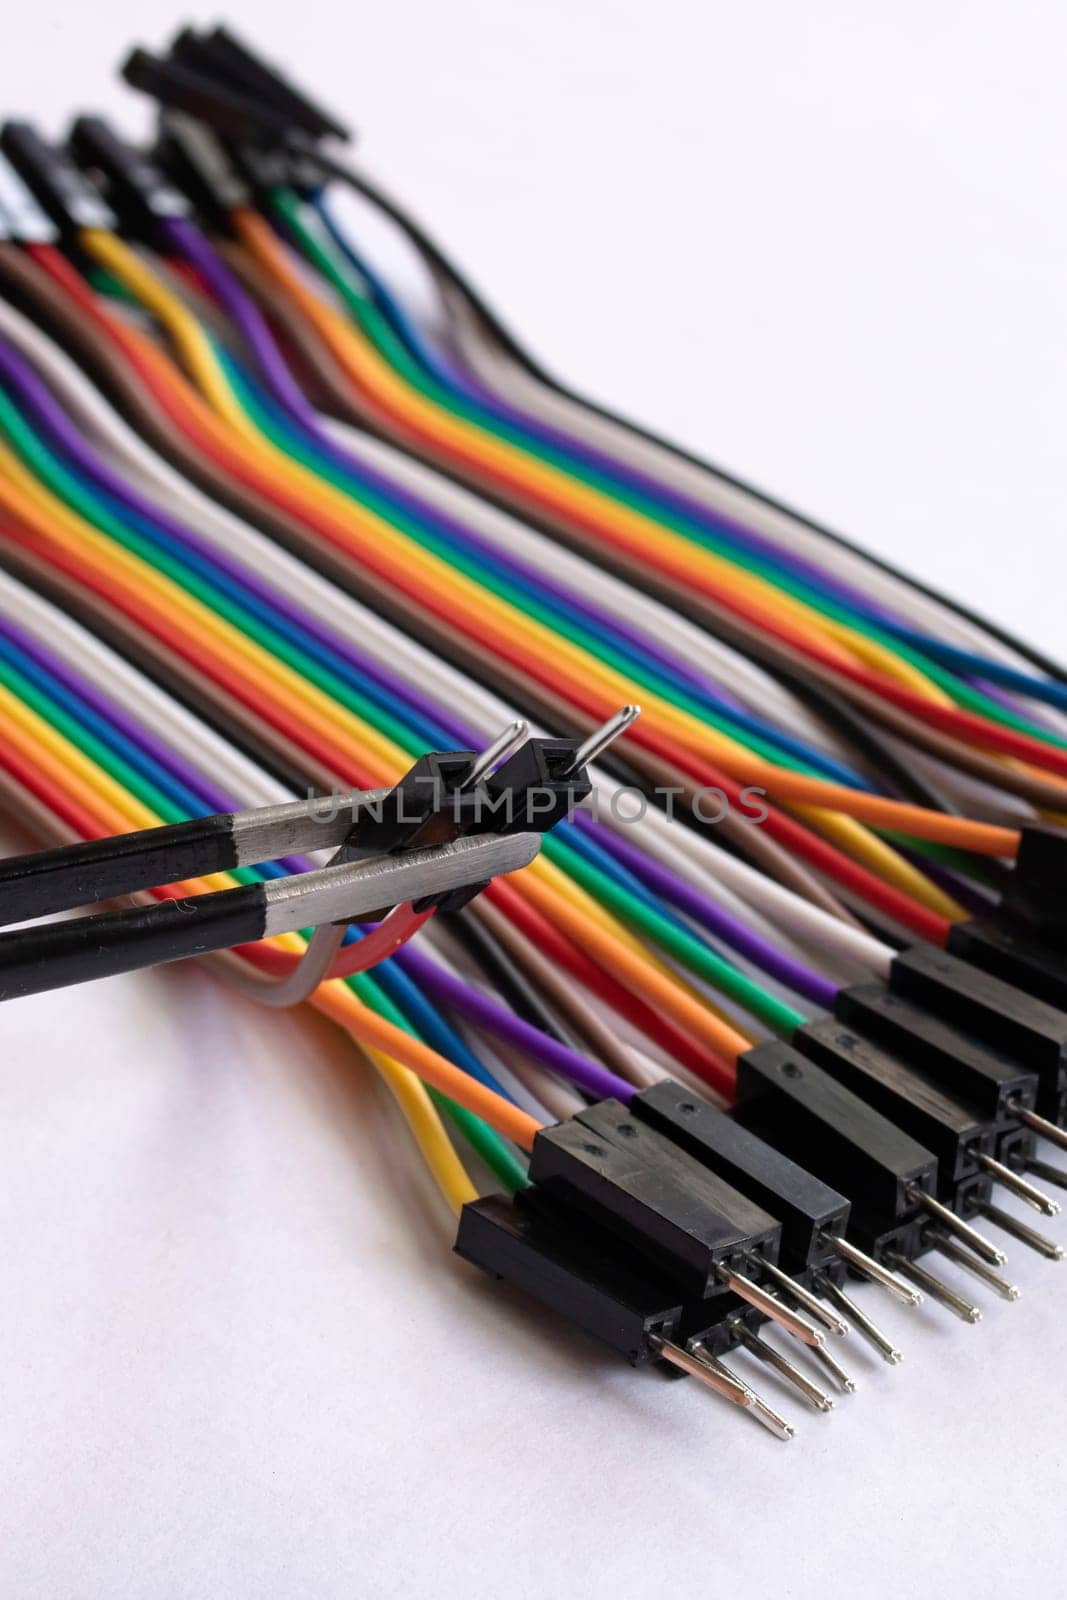 Multicolored computer wires and tweezers on a white background close up